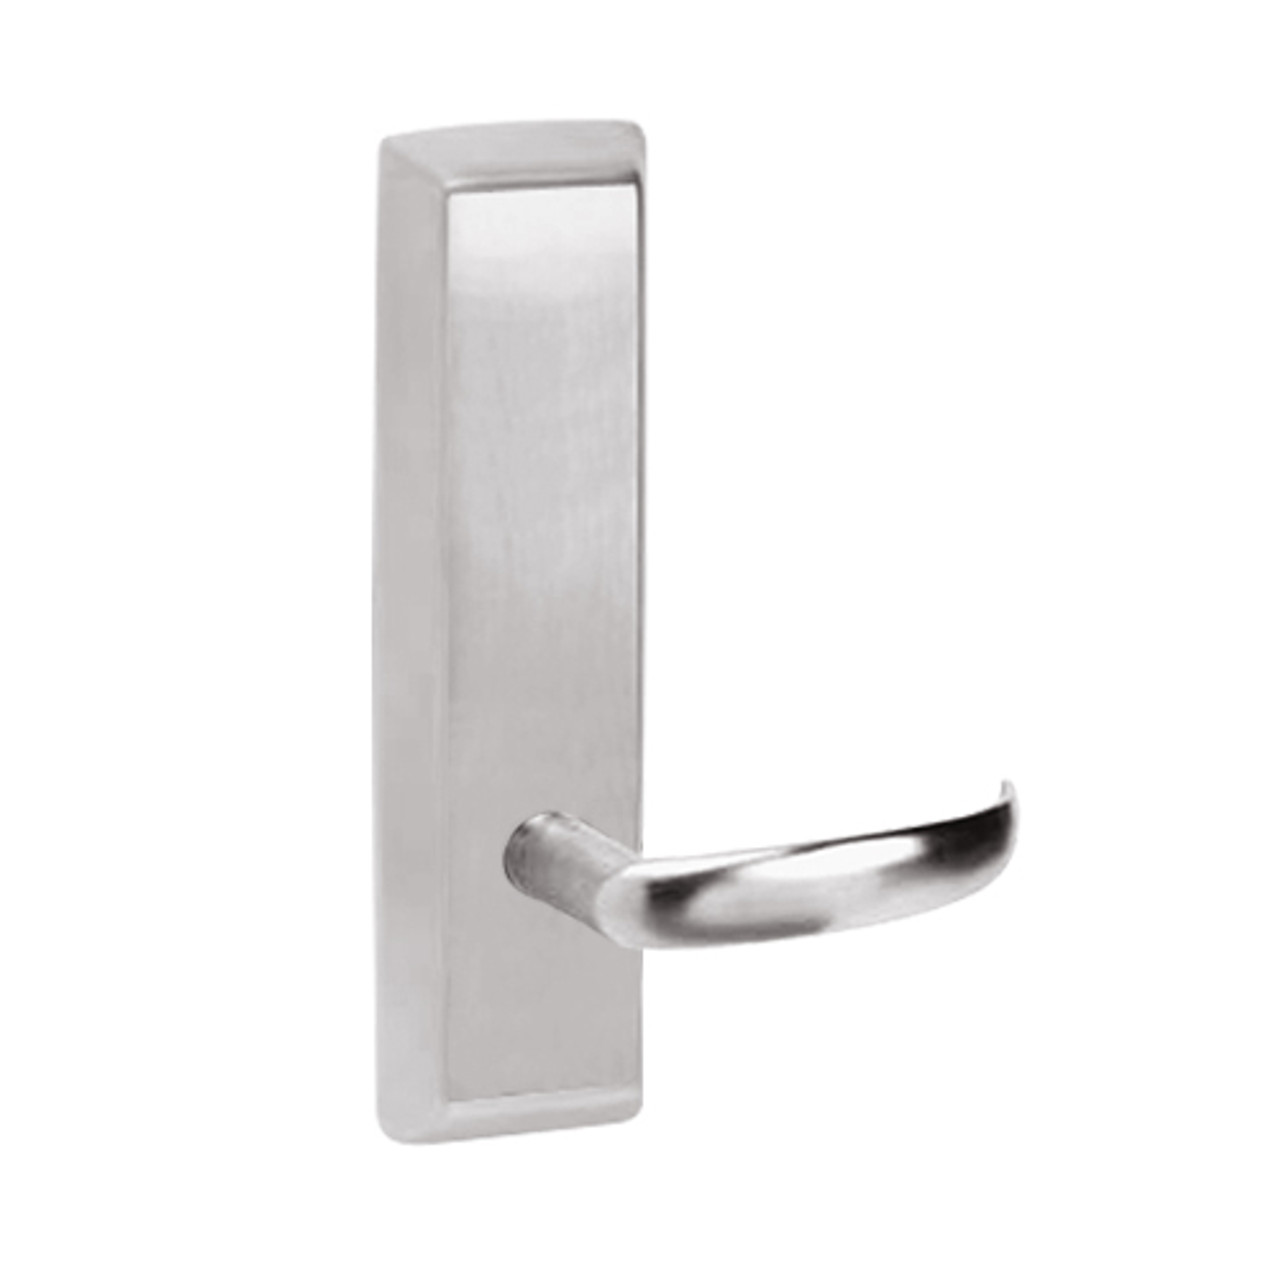 PR955-629-RHR Corbin ED5000 Series Exit Device Trim with Classroom Princeton Lever in Bright Stainless Steel Finish